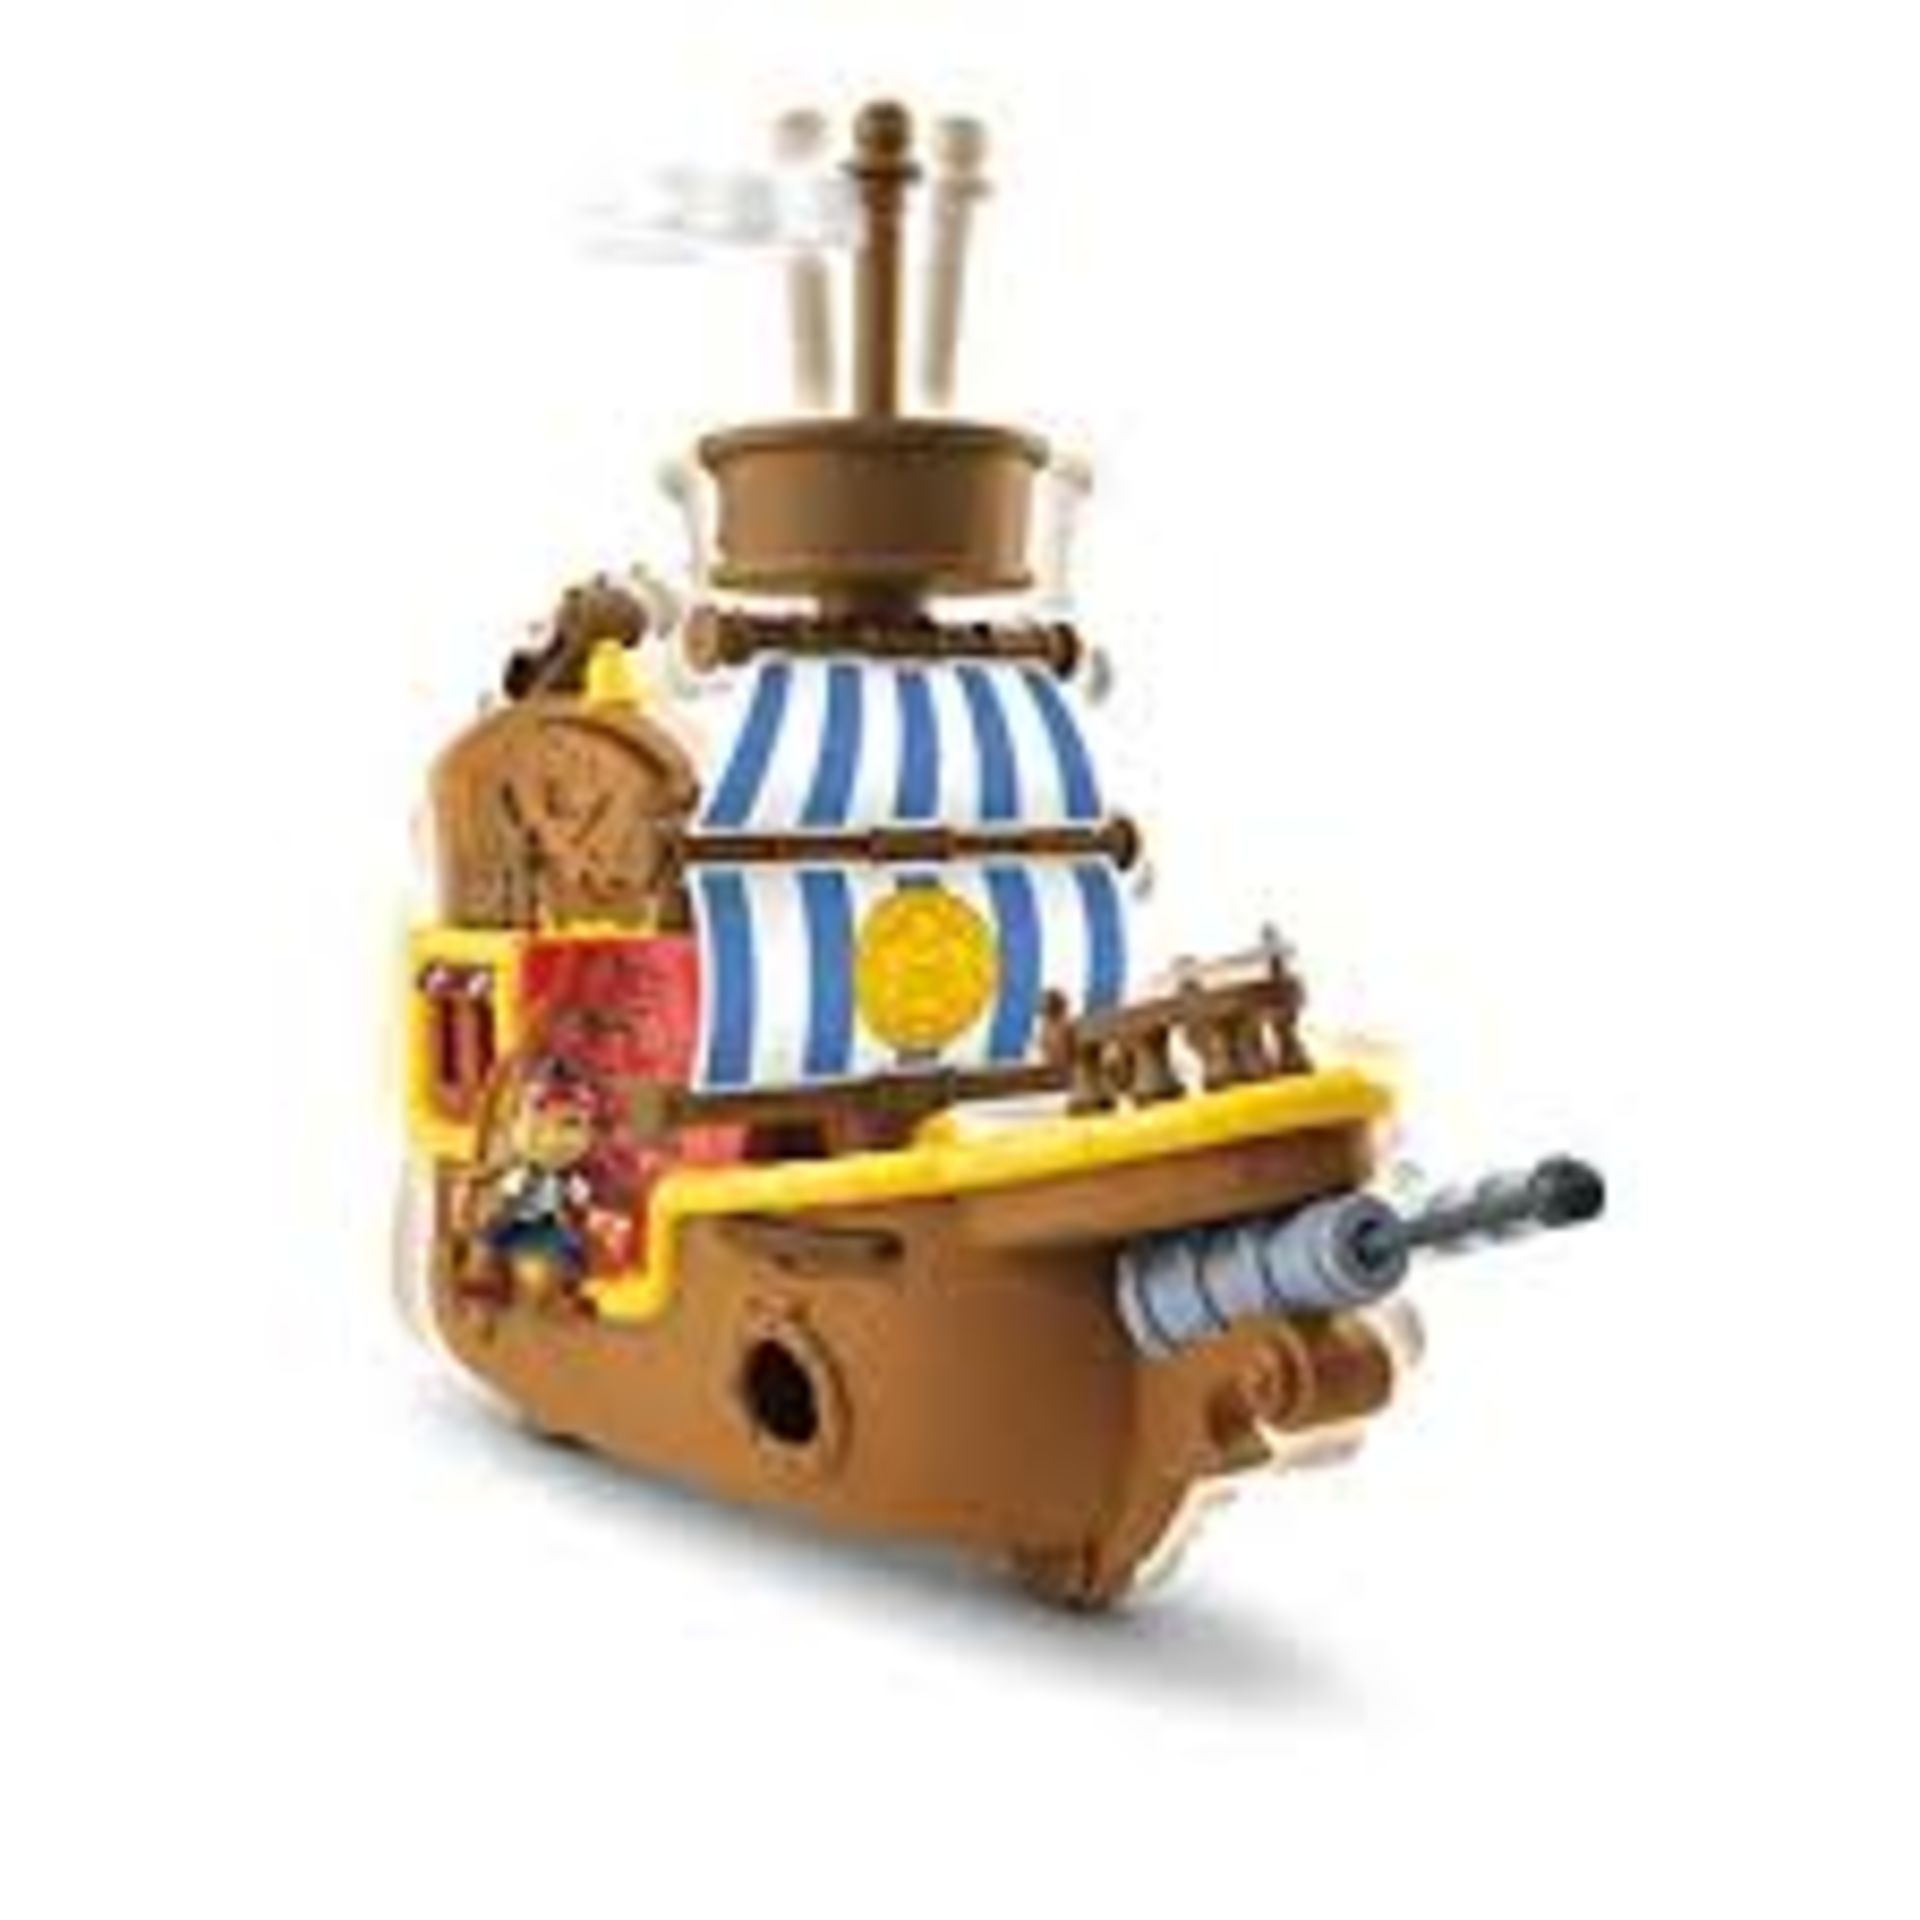 7 x Jake and the Neverland Pirates Bucky Pirate Ship | 885141925630 | RRP £ 293.51